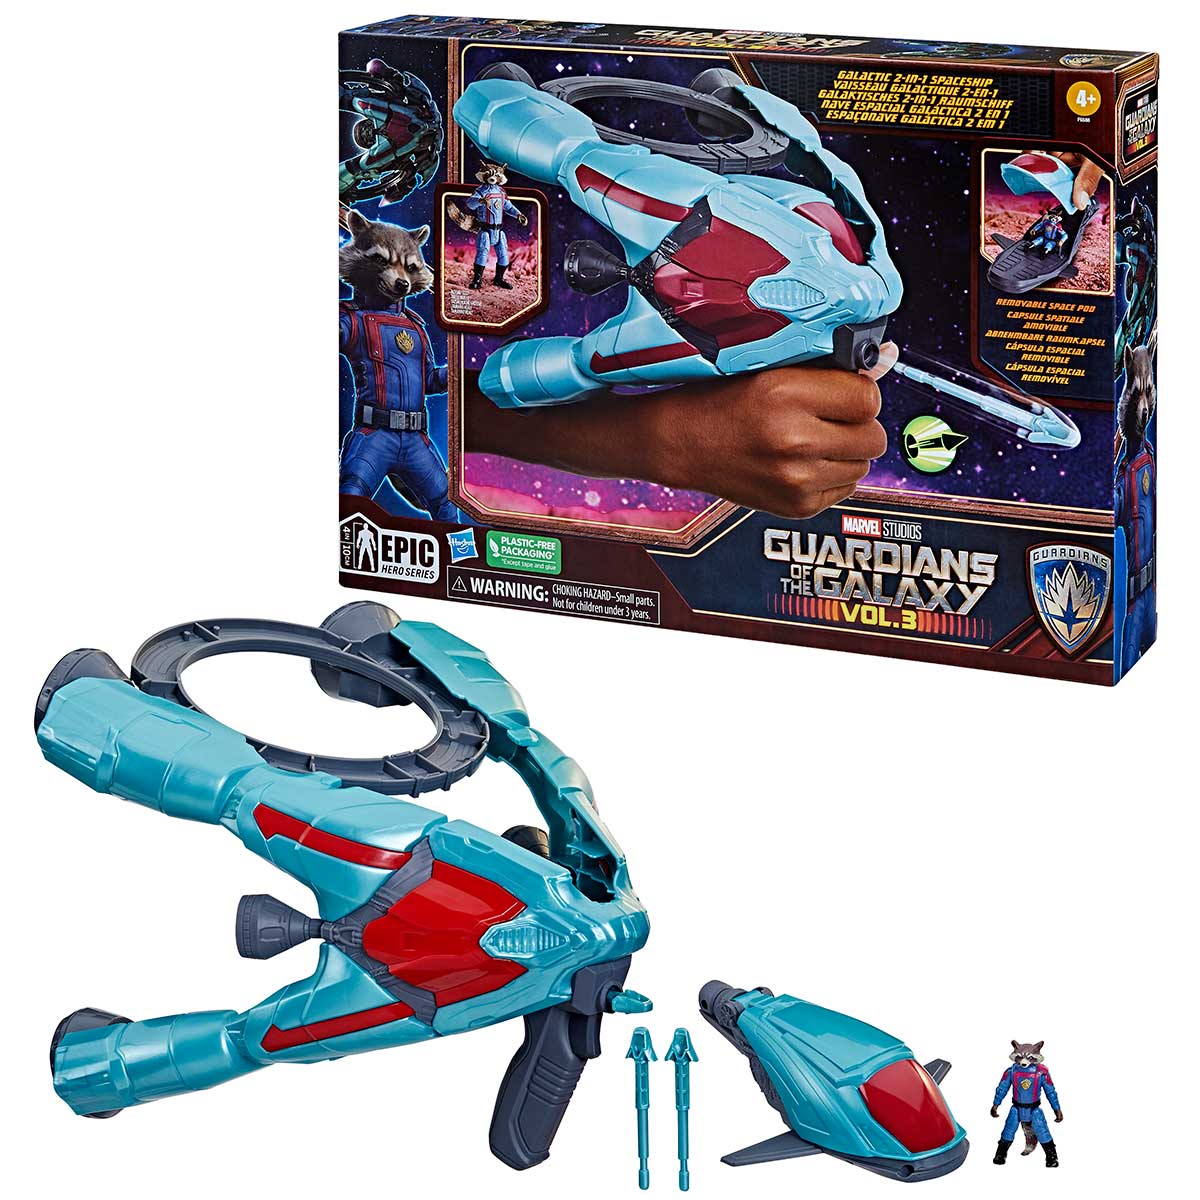 Guardians of the Galaxy Galactic 2 in 1 Spaceship